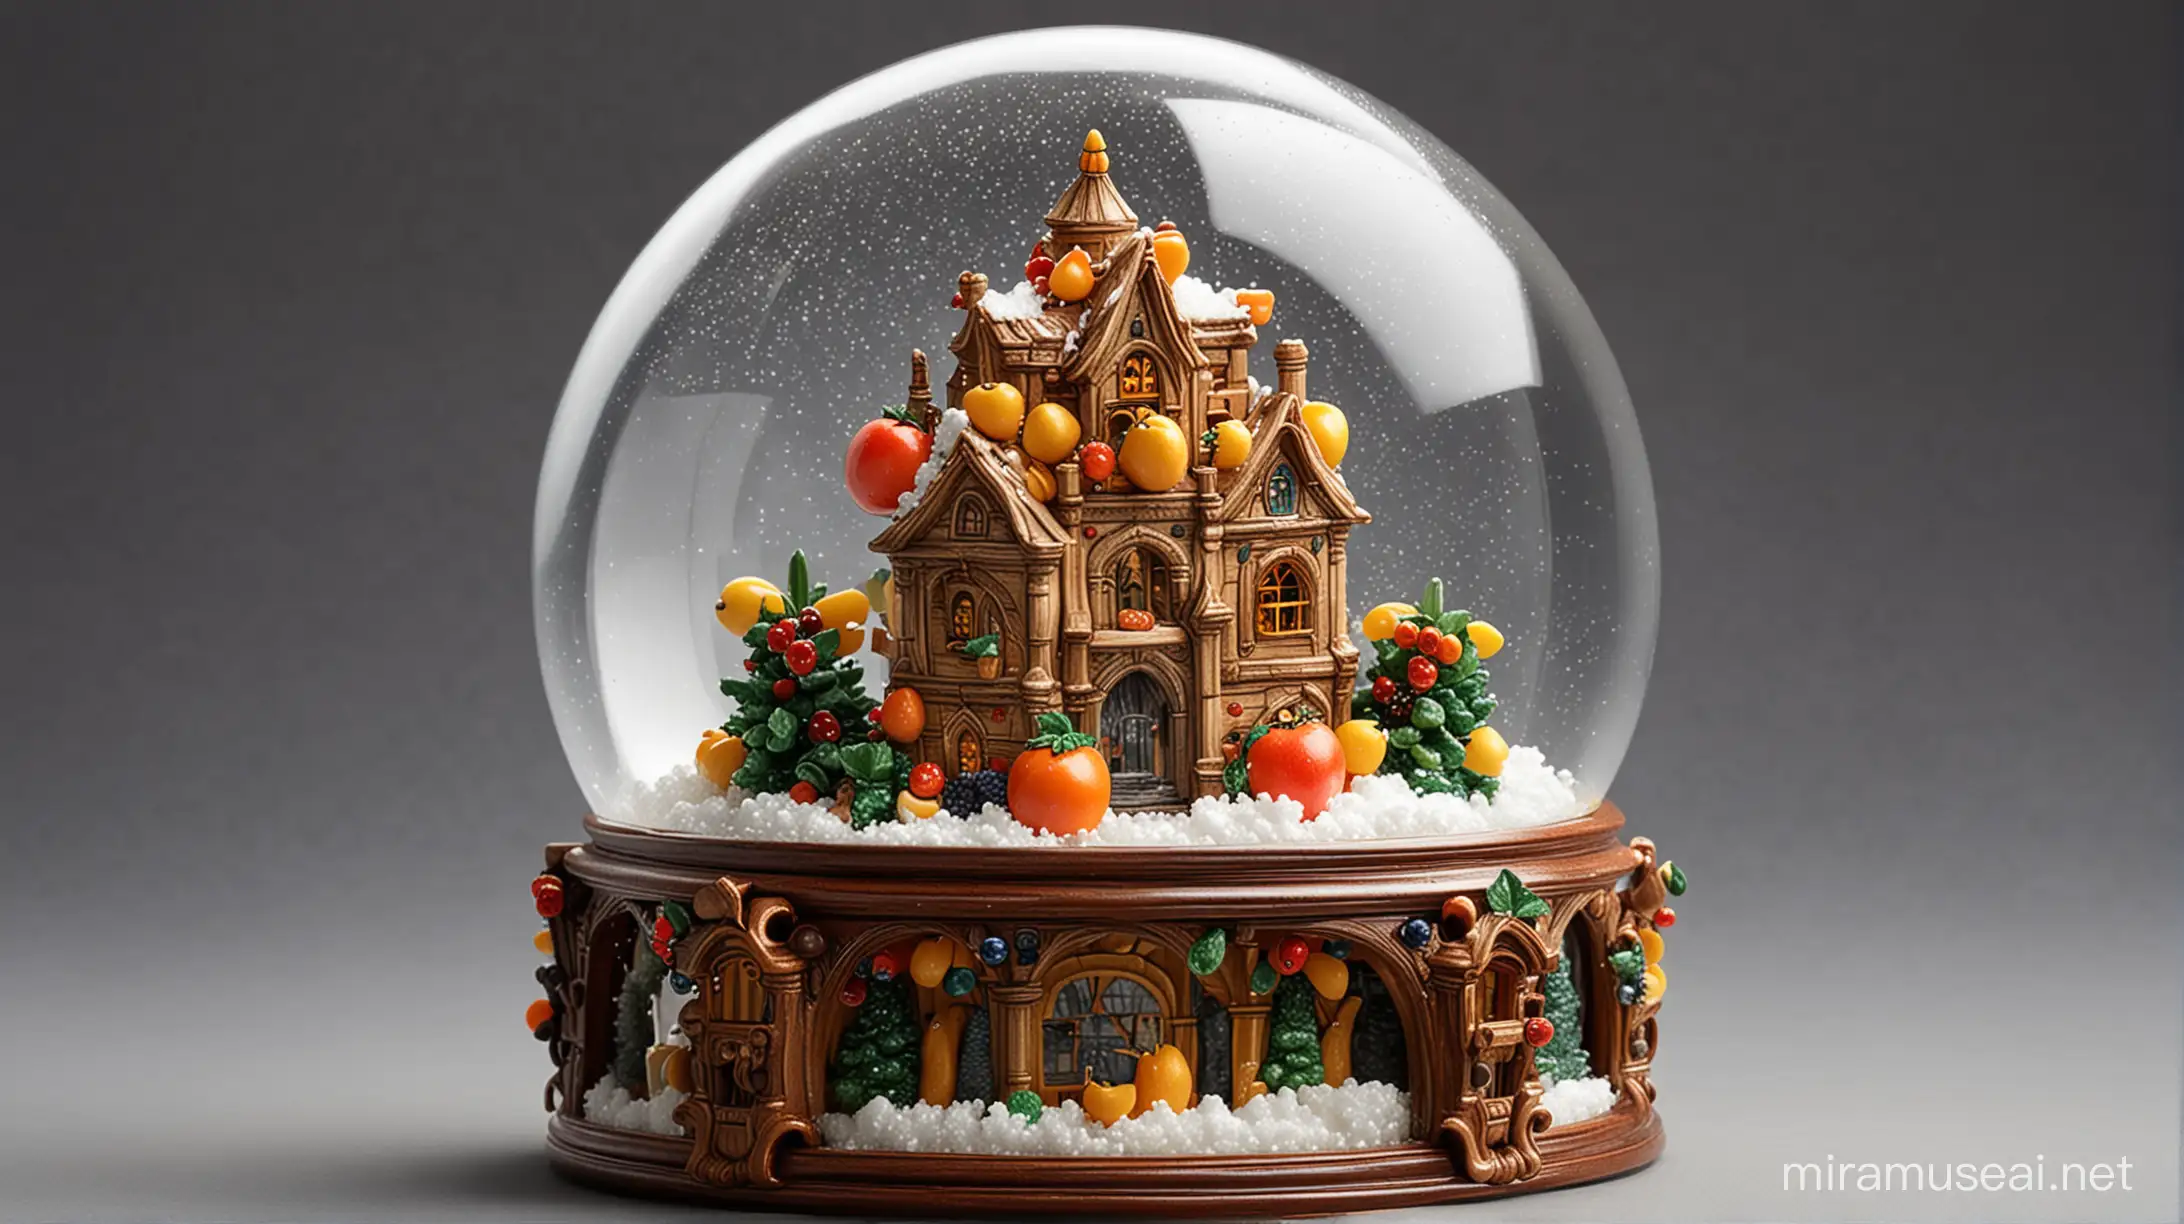 Renaissance Style Snow Globe with Fruity Interior and Exterior